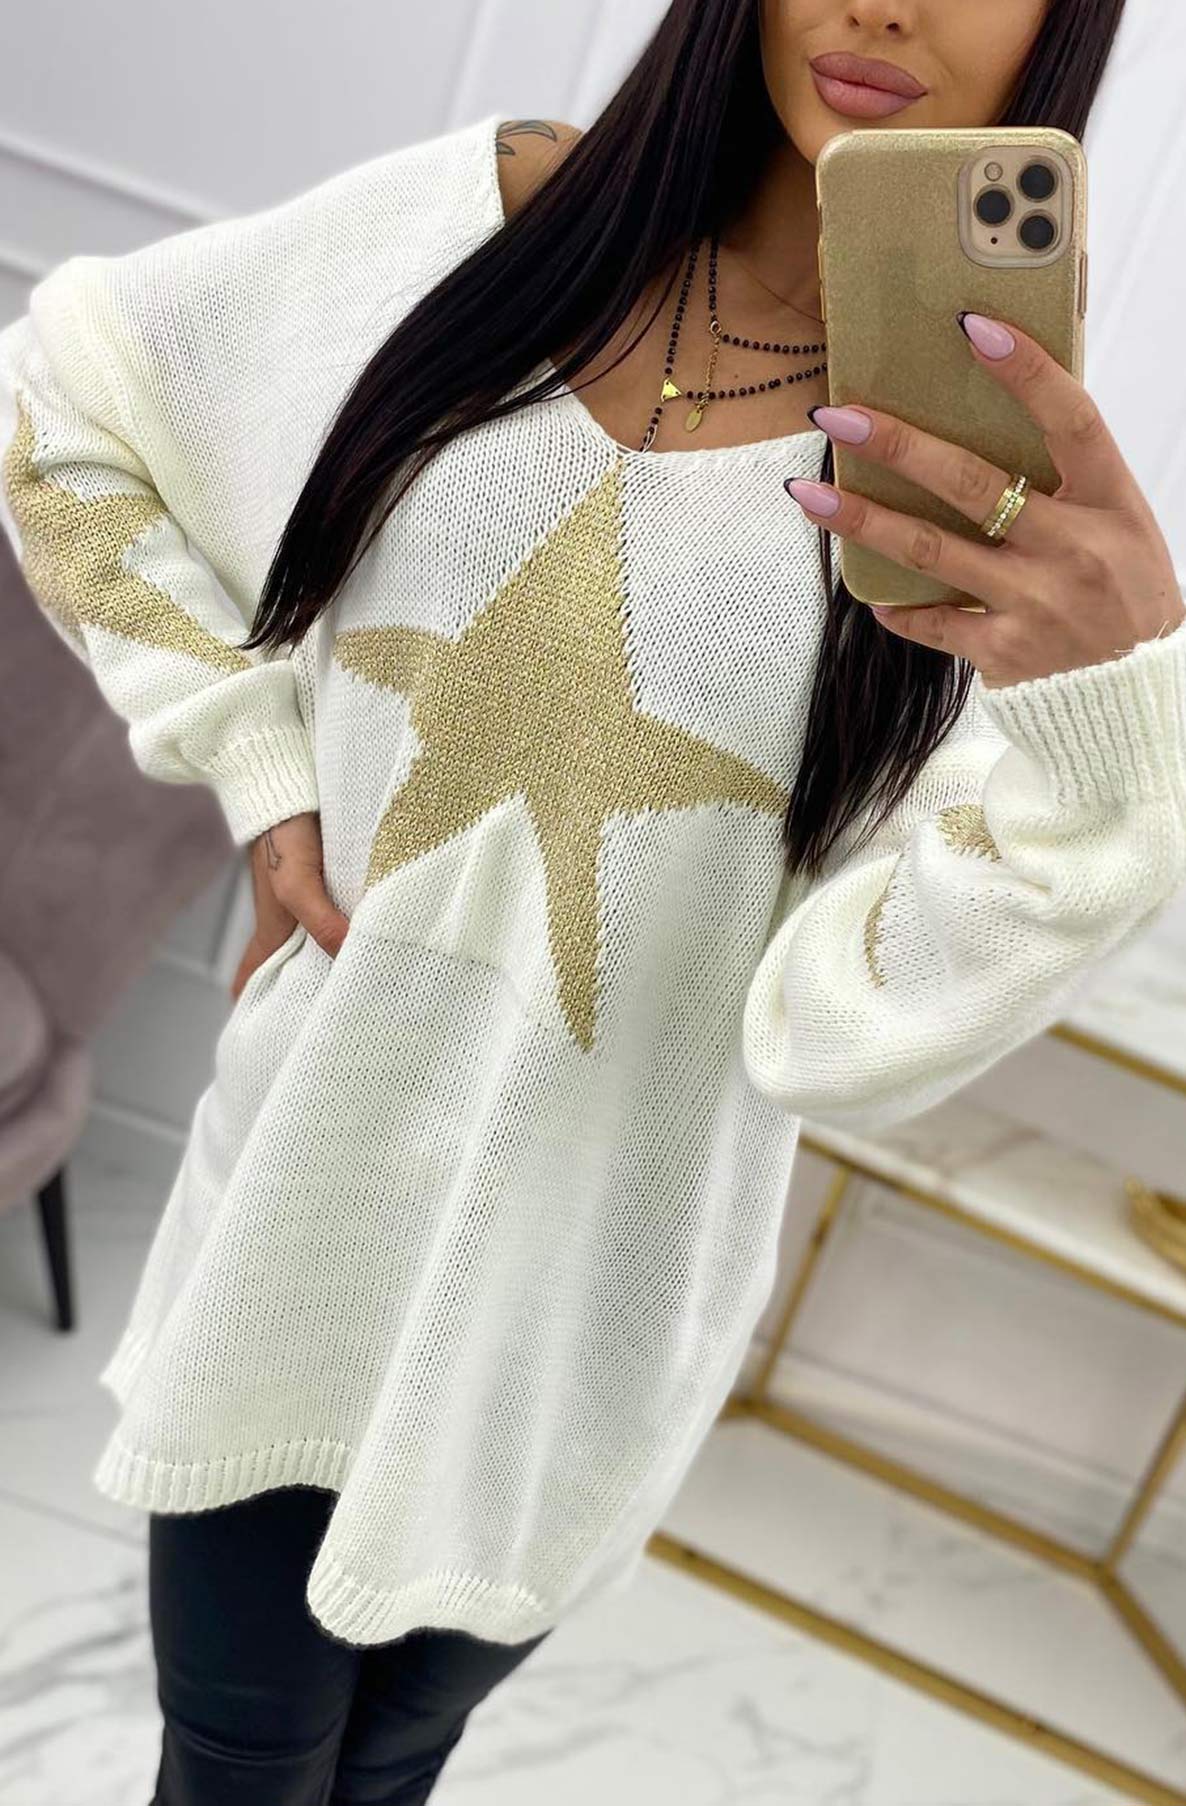 Bethany 'STAR' Shimmer Knitted Jumper Tunic Top-Ivory